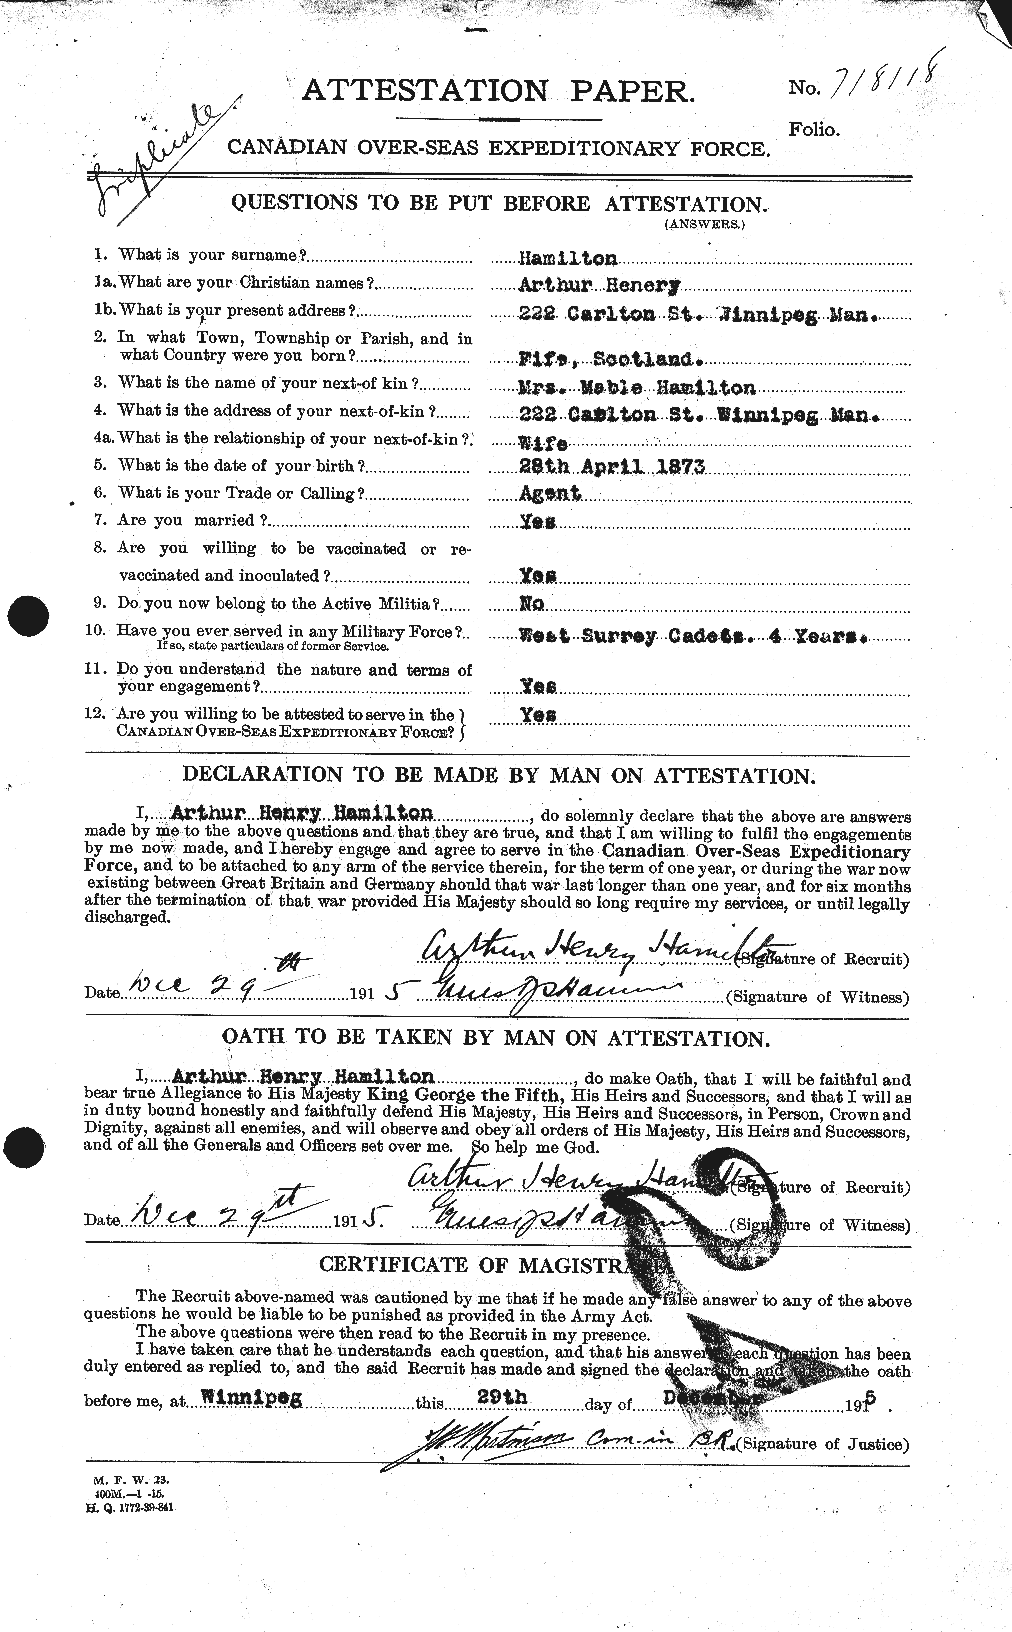 Personnel Records of the First World War - CEF 375251a